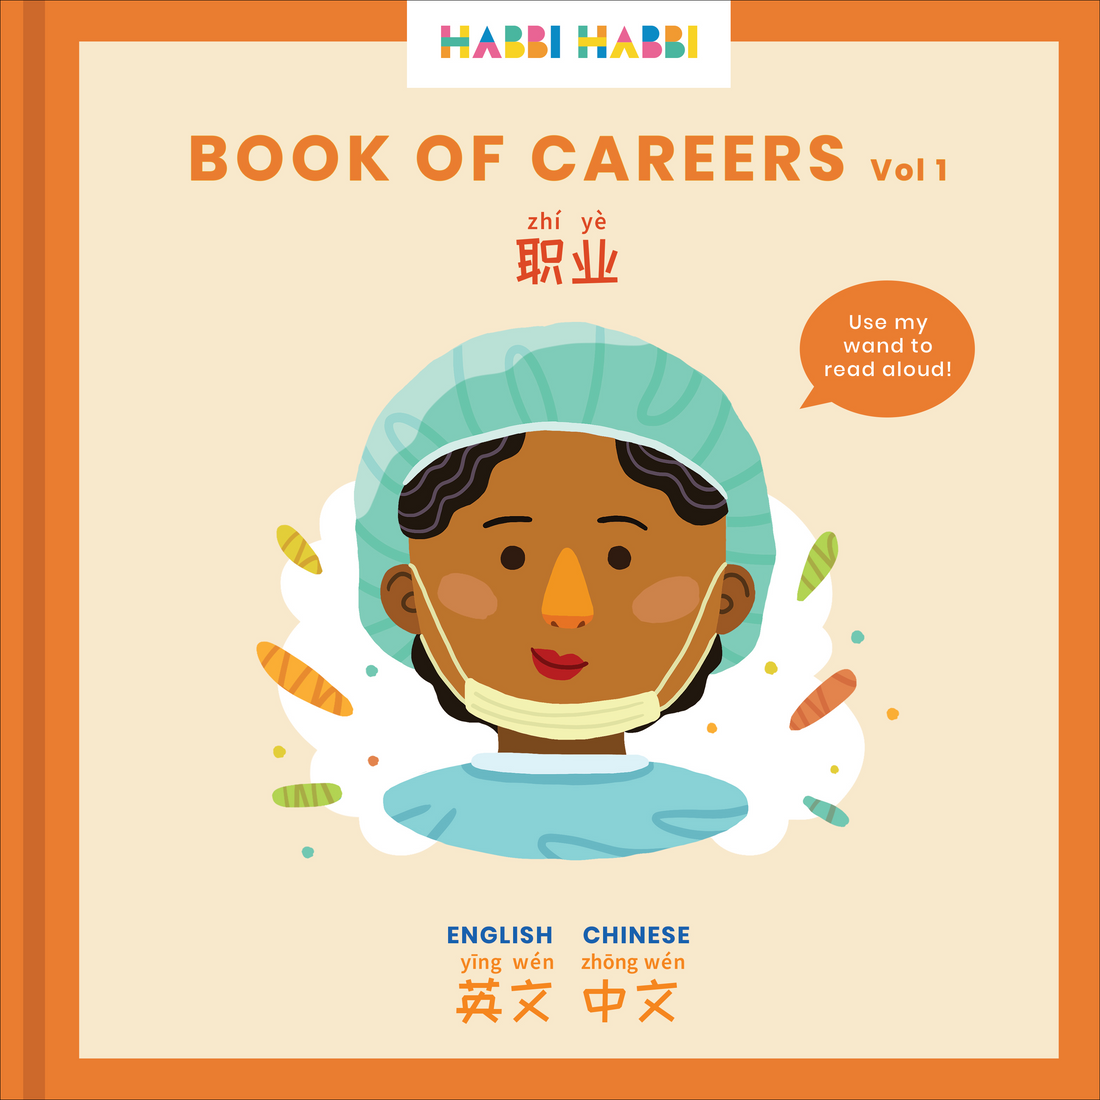 Children's books about Strong Women in Chinese.  Our Book of Careers explores Mom's different careers in English and Chinese.